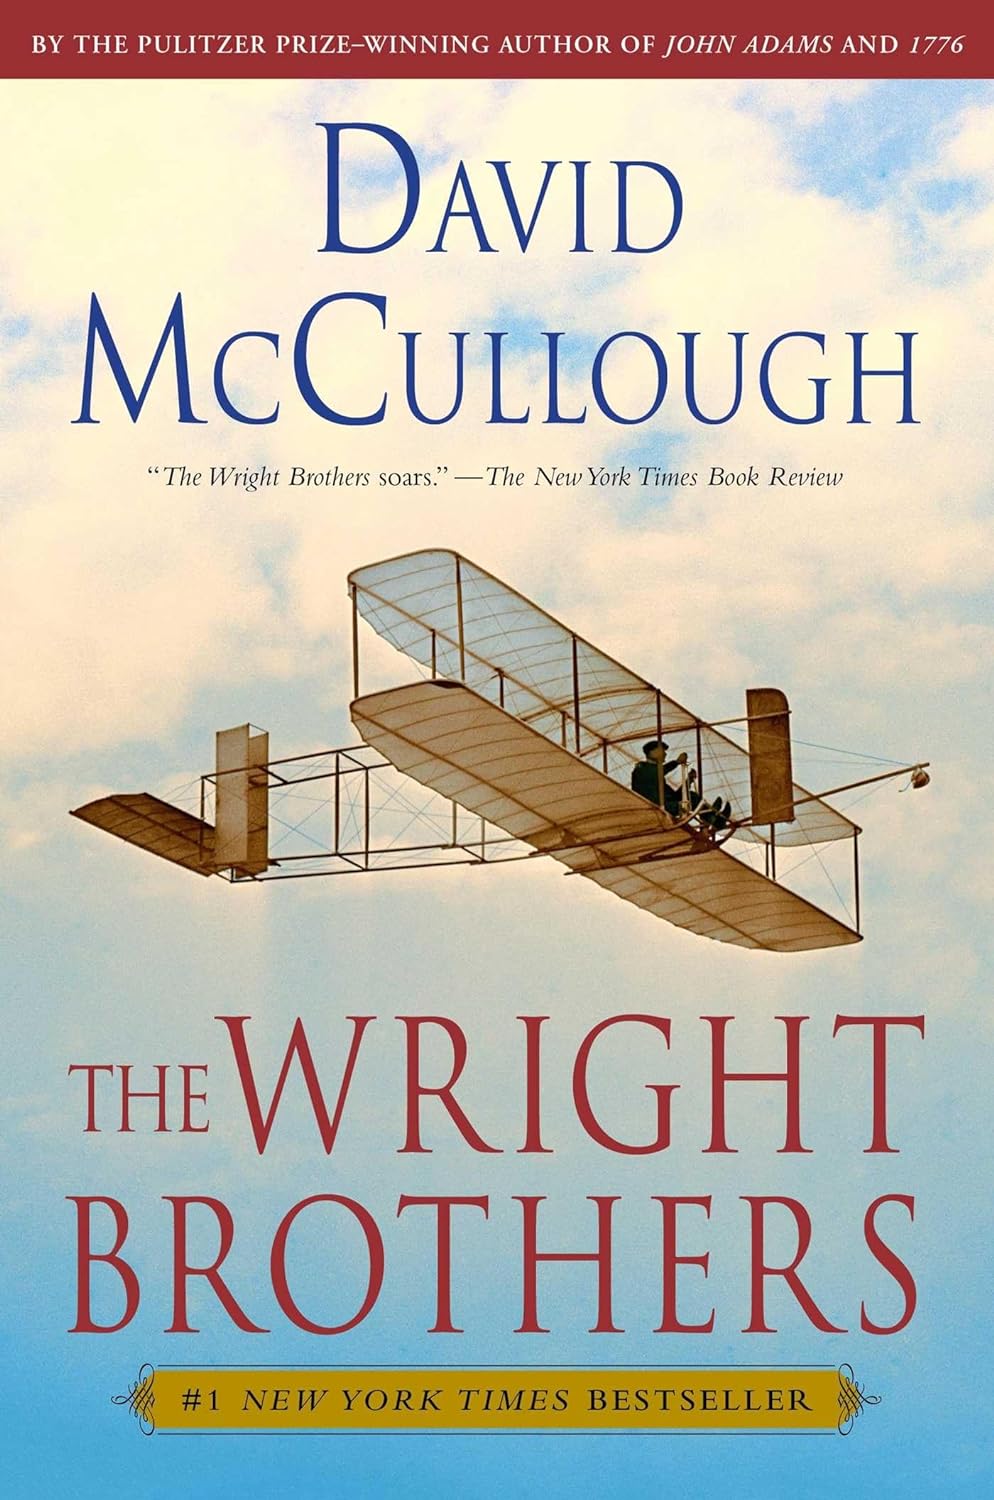 2 Key Lessons from the Wright Brothers